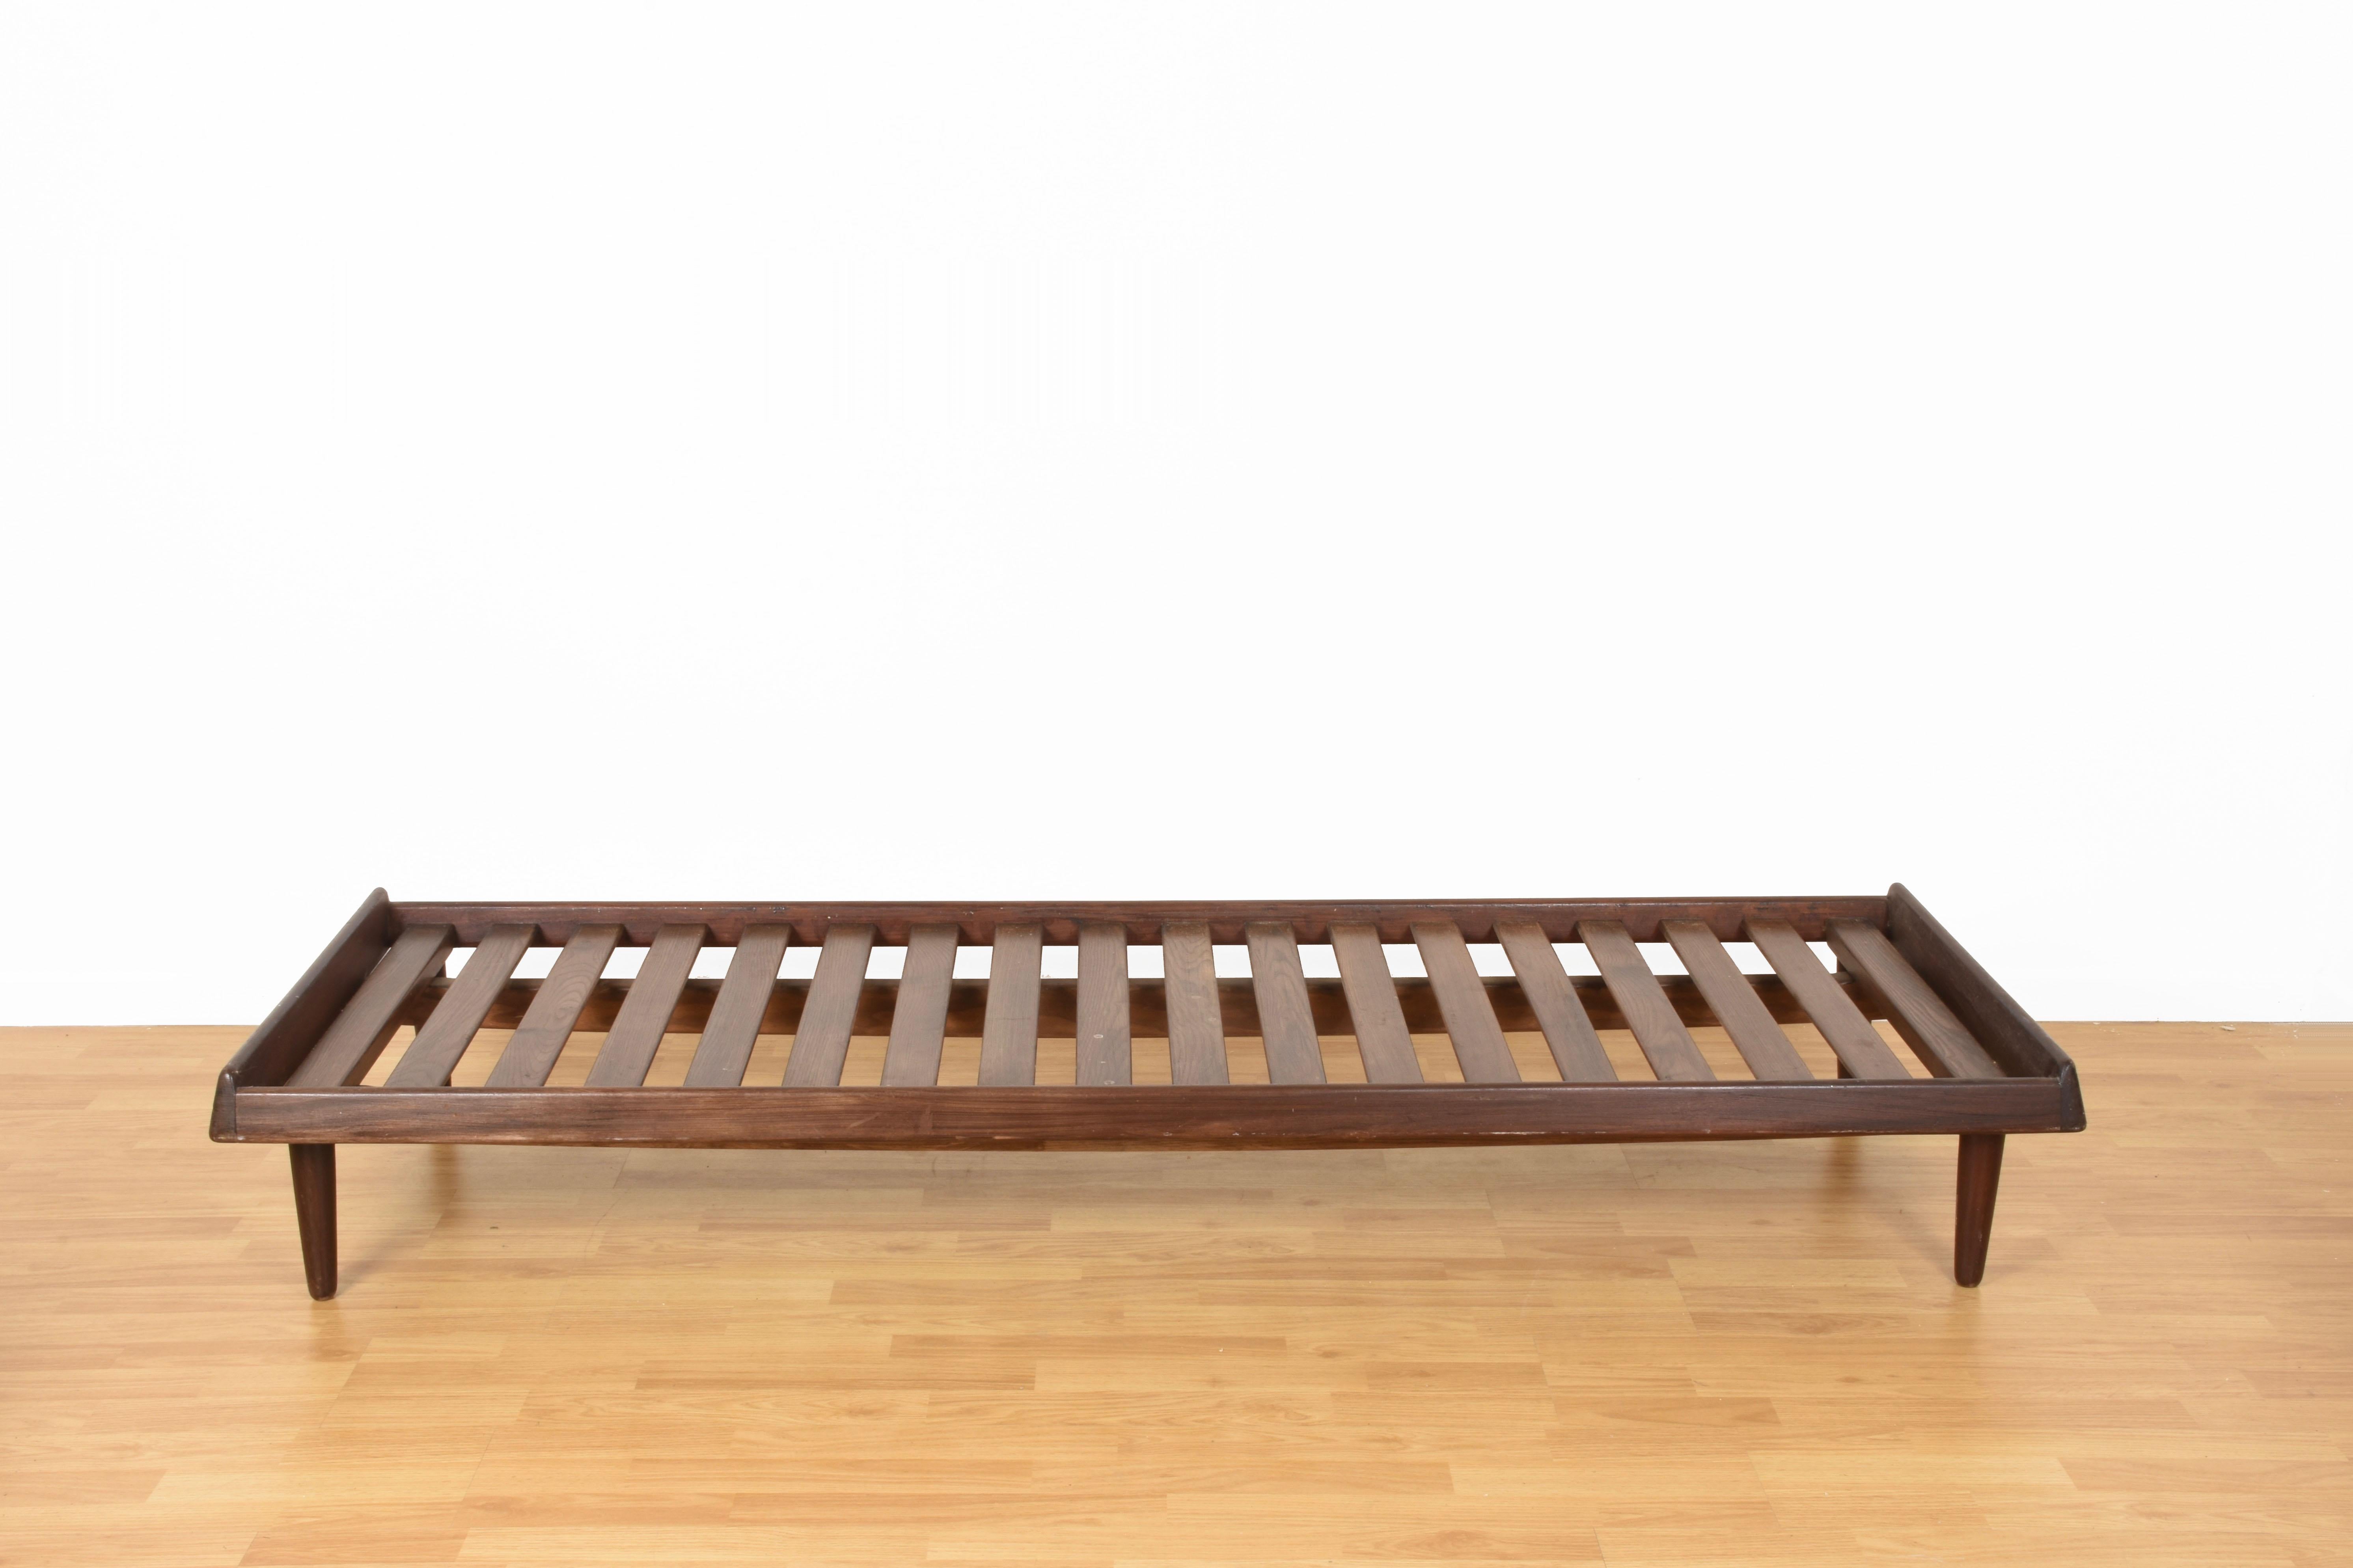 Fantastic sofa model TV161 designed by Hans Olsen, produced by Bramin, Denmark 1957. Made of solid teak. It can be used as a sofa or bench. Very beautiful and robust. 
Original condition.